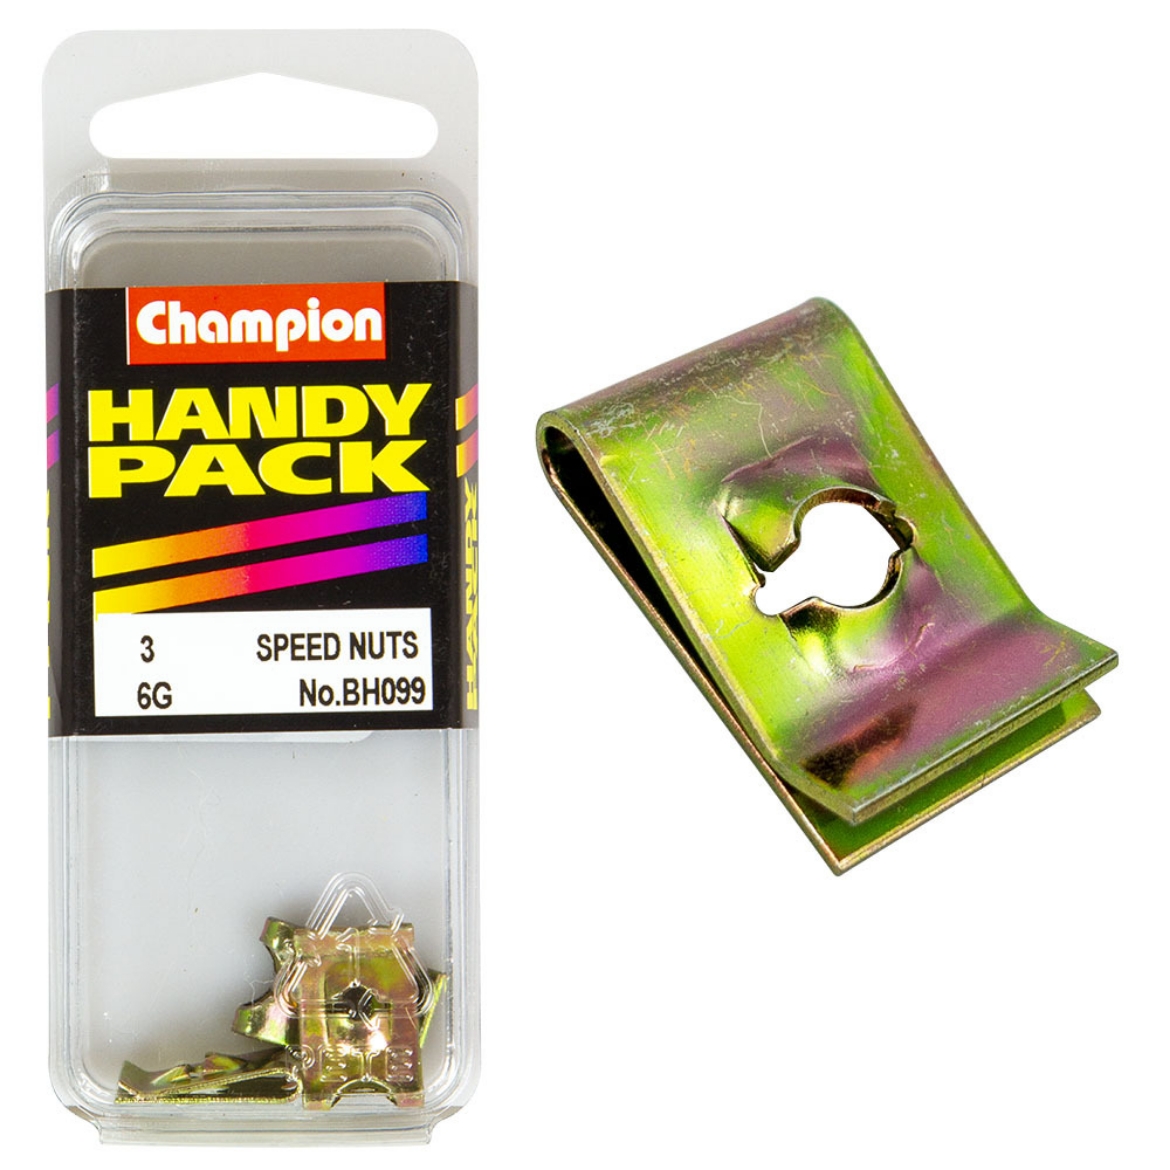 Picture of Handy Pk Speed Nuts 6g x 21/32x7/16 (Pkt.3)